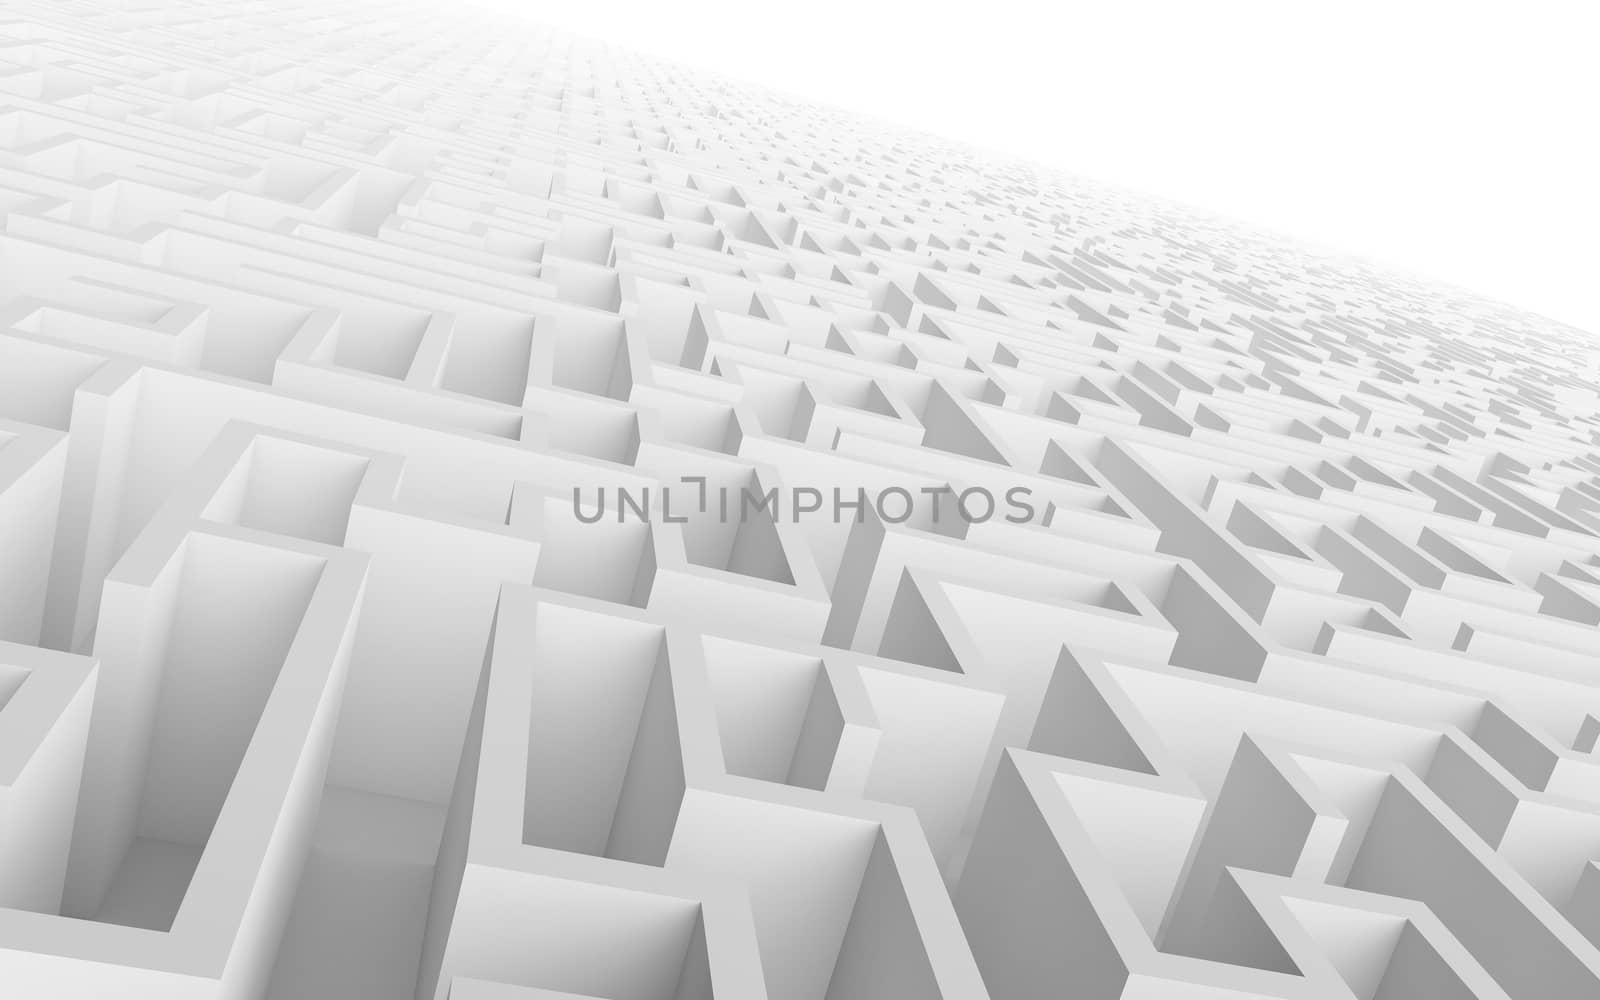 High quality illustration of a large maze or labyrinth